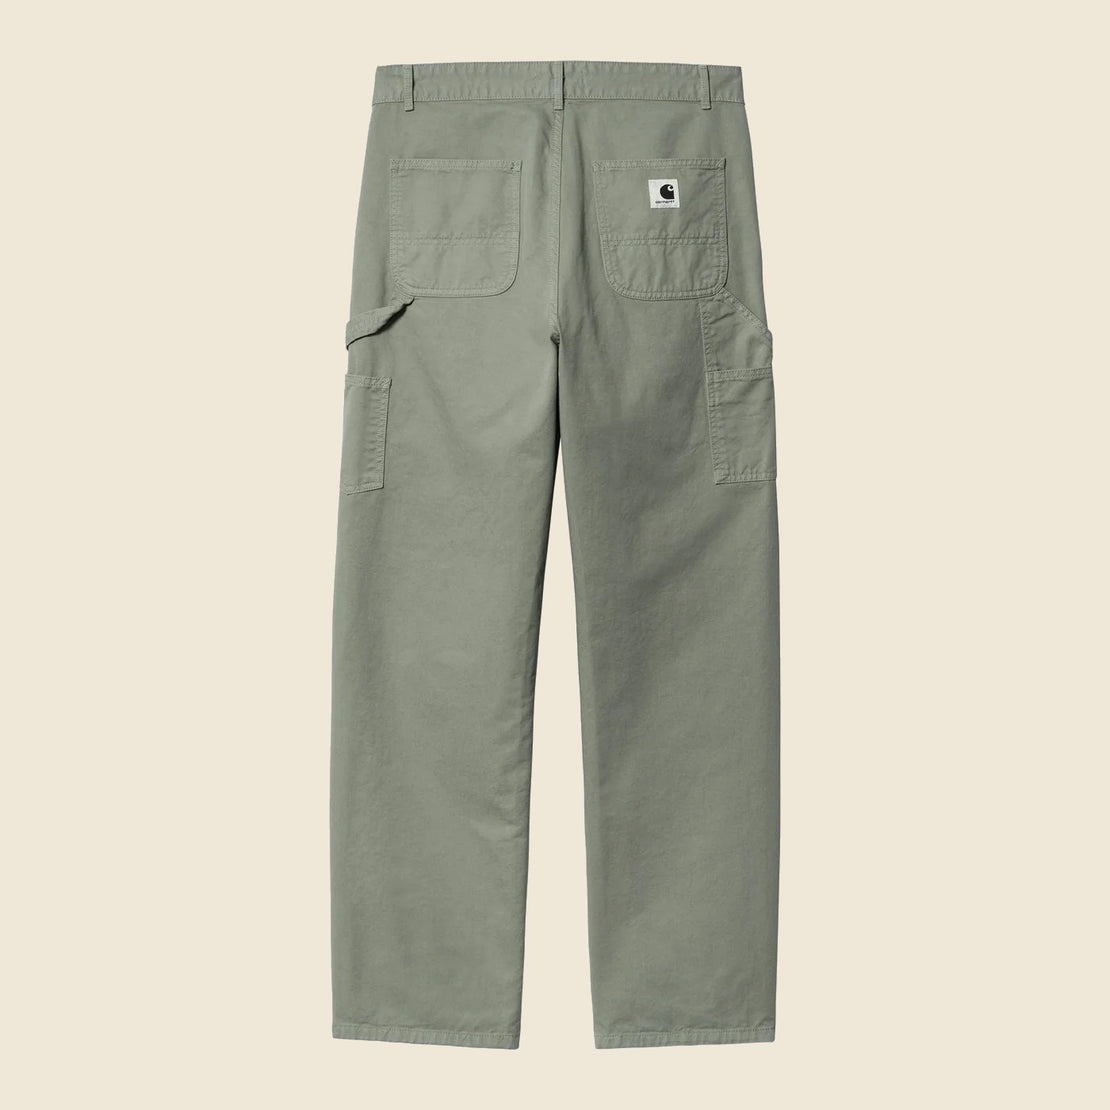 Pierce Pant Straight - Yucca - Carhartt WIP - STAG Provisions - W - Pants - Twill